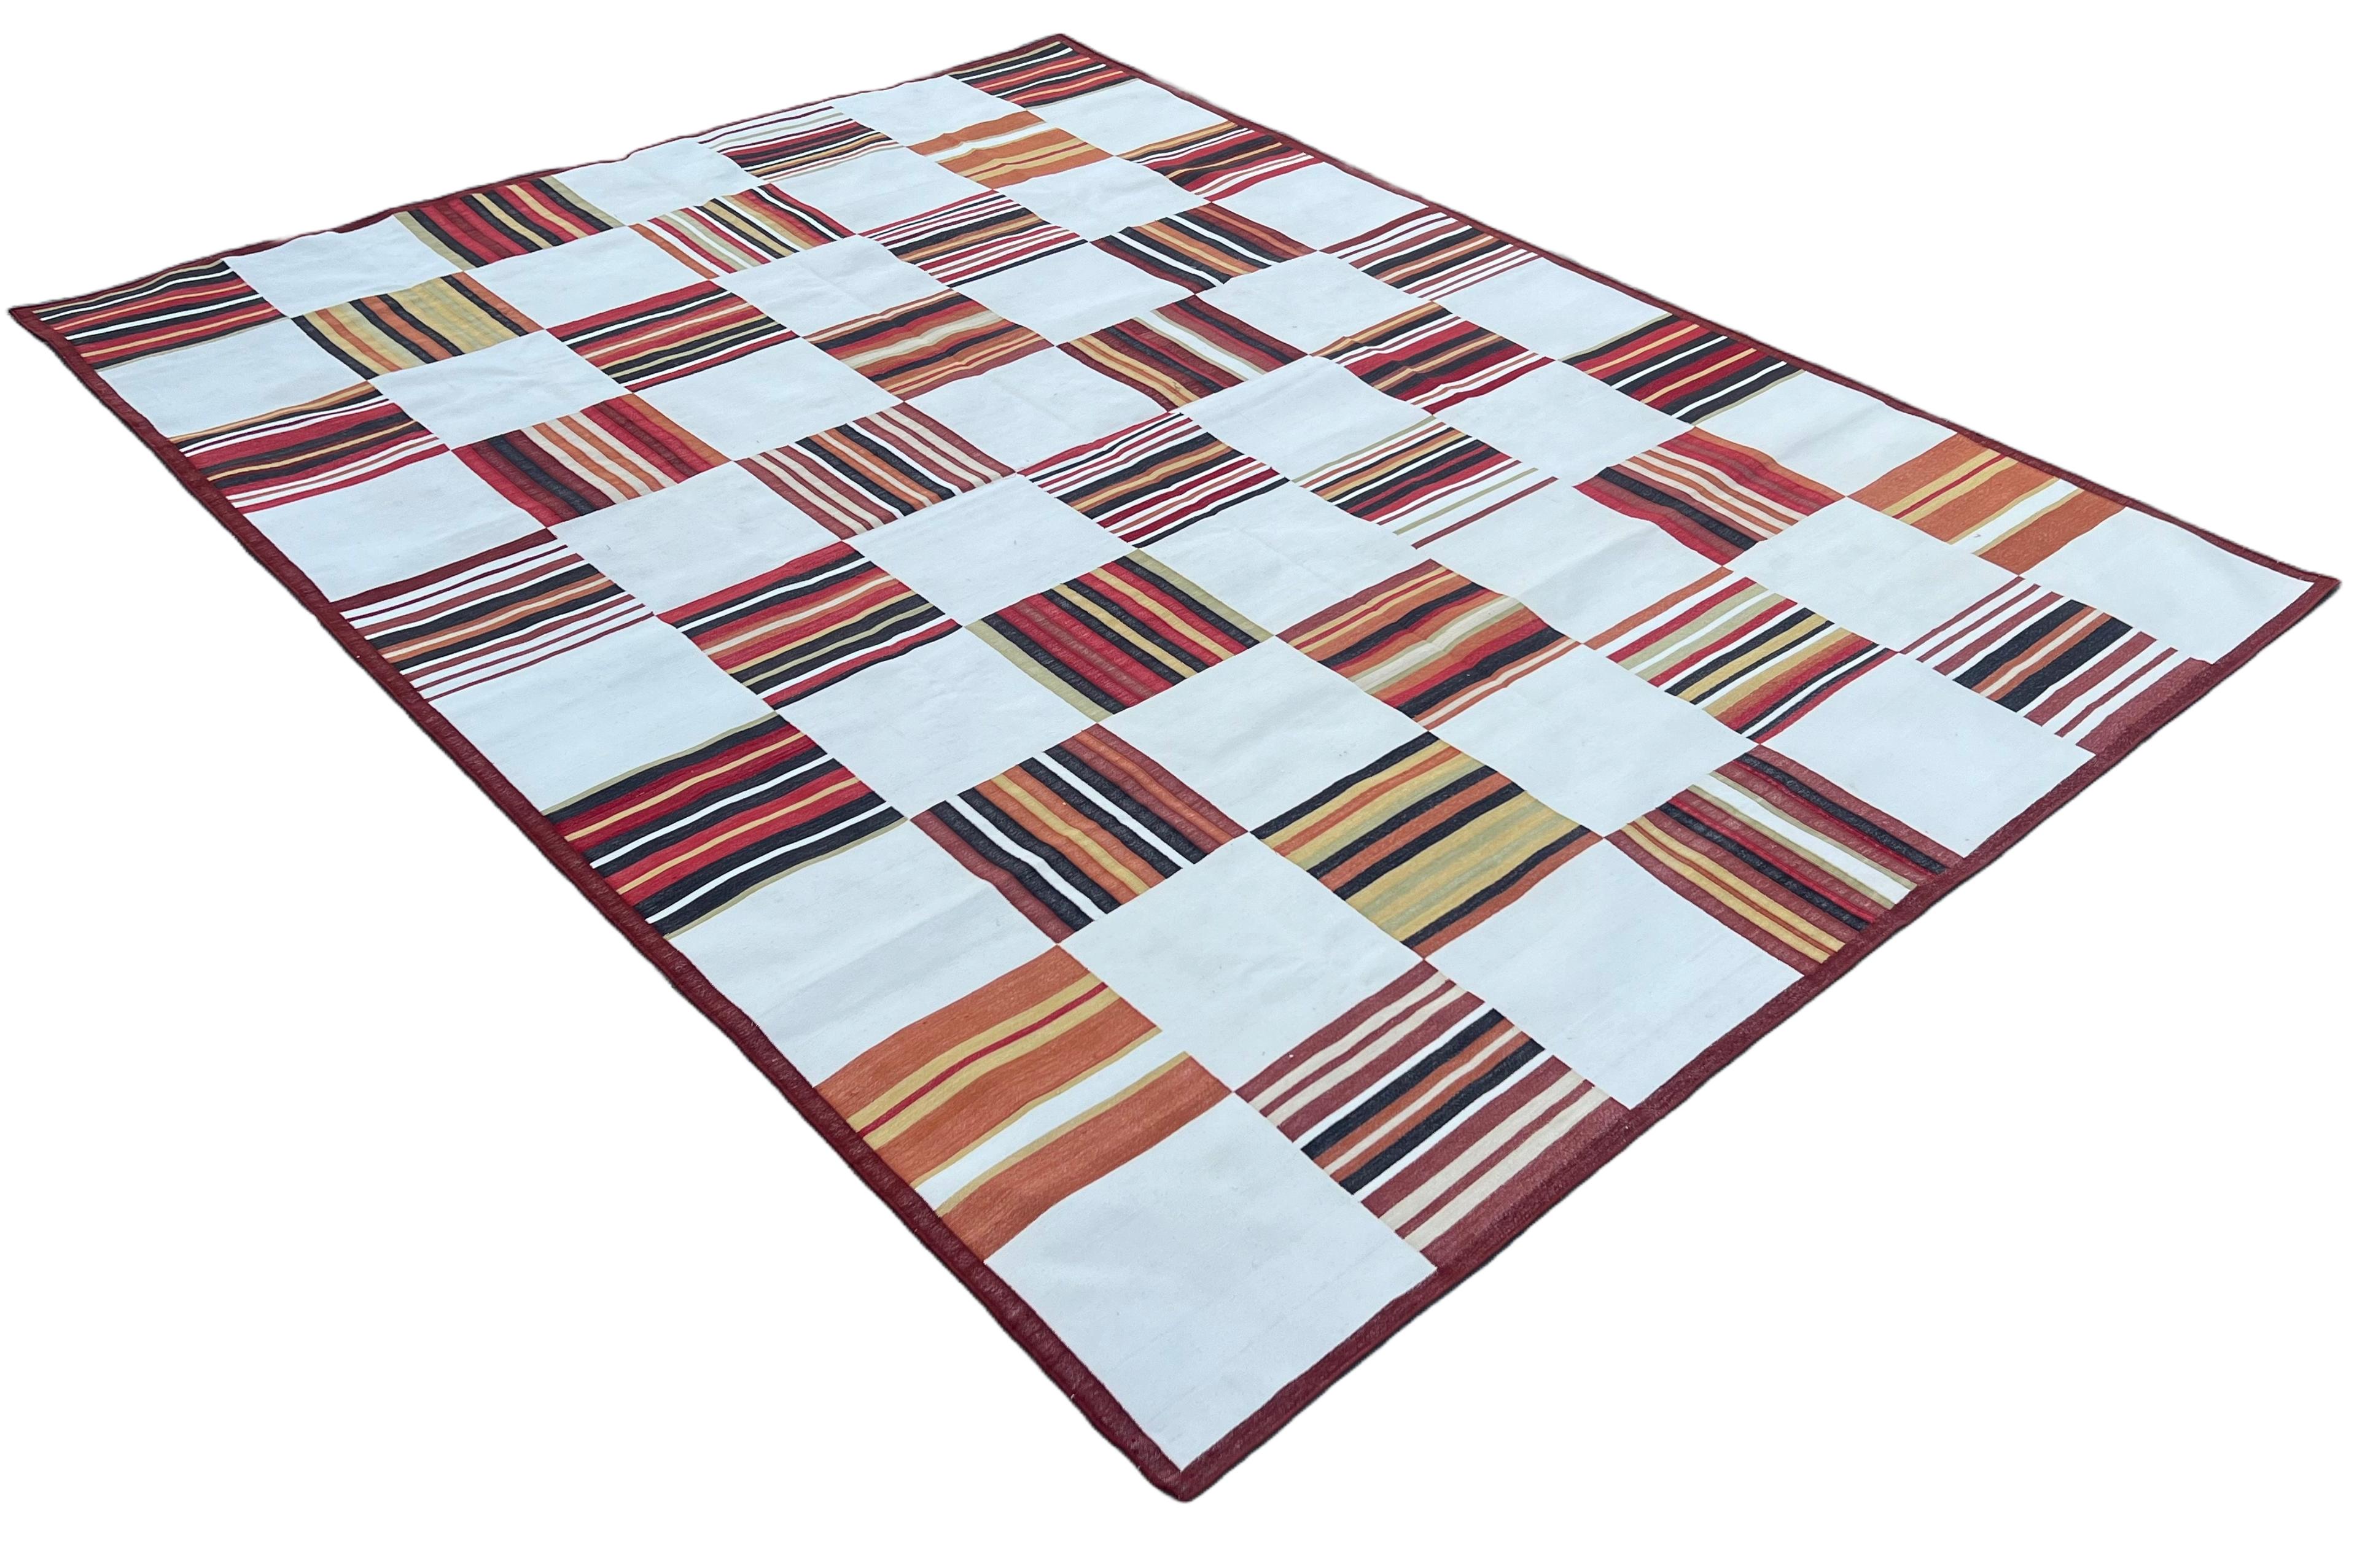 Cotton Vegetable Dyed Area Rug, Cream & Terracotta Red Tile Patterned Indian Dhurrie-9'x12'
These special flat-weave dhurries are hand-woven with 15 ply 100% cotton yarn. Due to the special manufacturing techniques used to create our rugs, the size